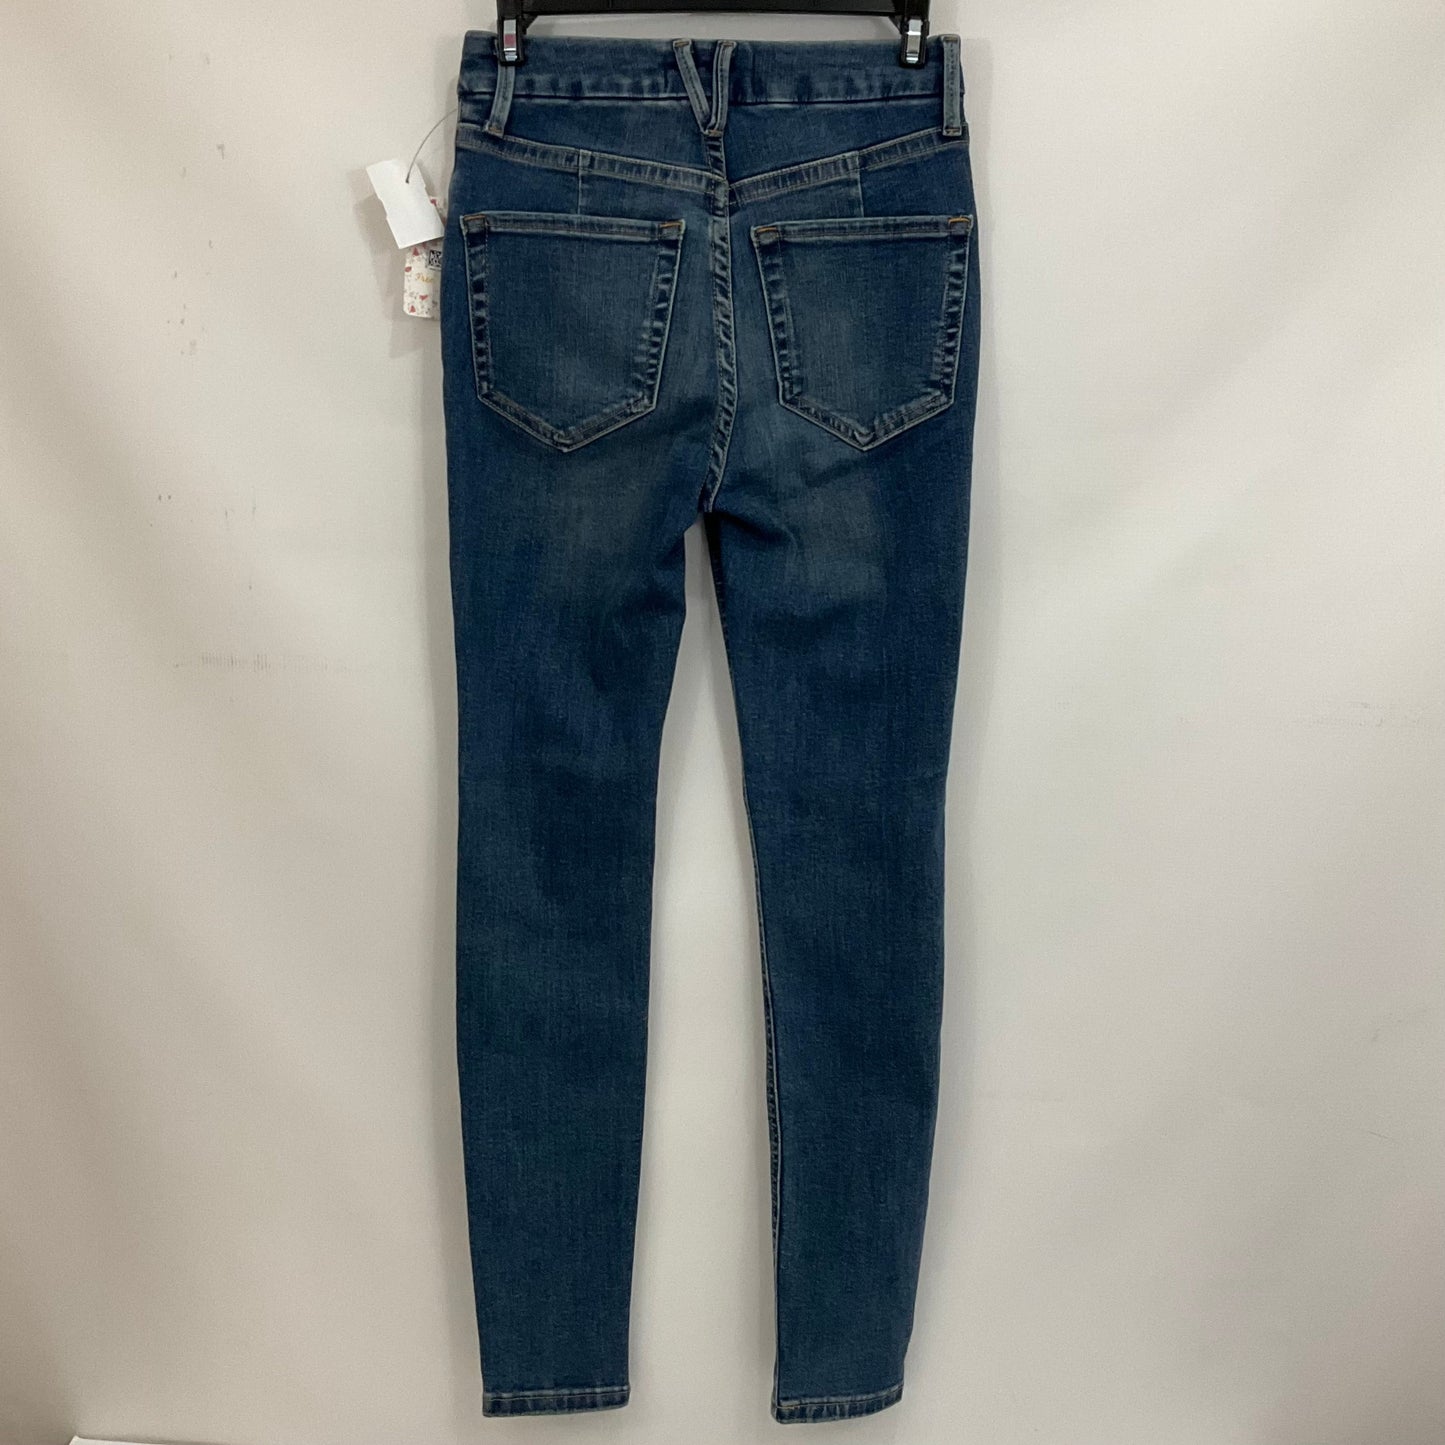 Jeans Skinny By Free People  Size: 2